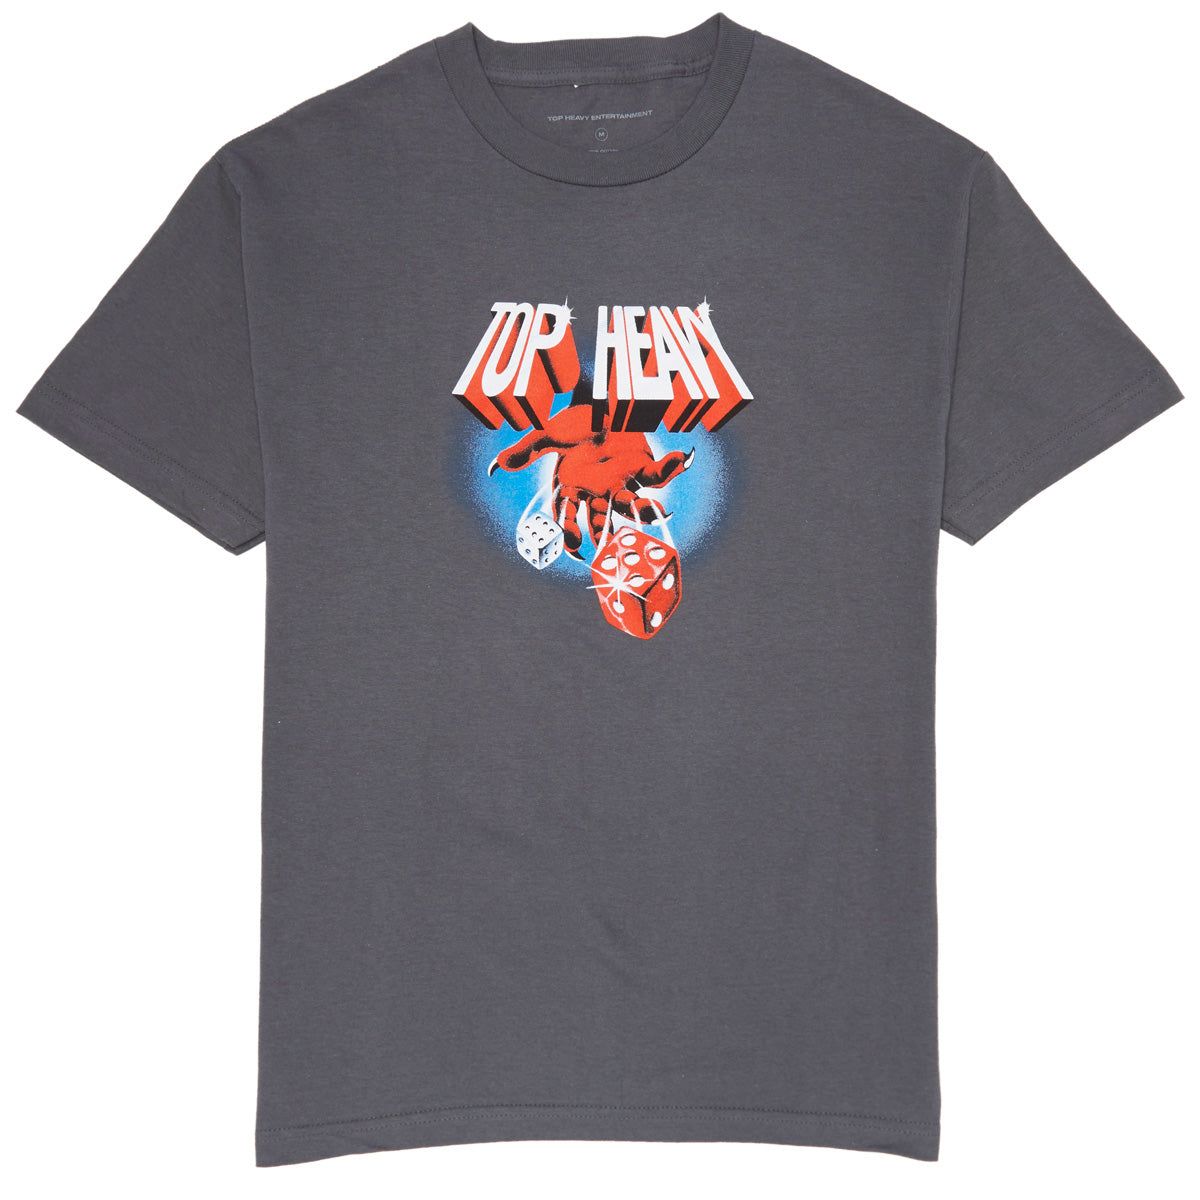 Top Heavy Devils Dice T-Shirt - Charcoal image 1